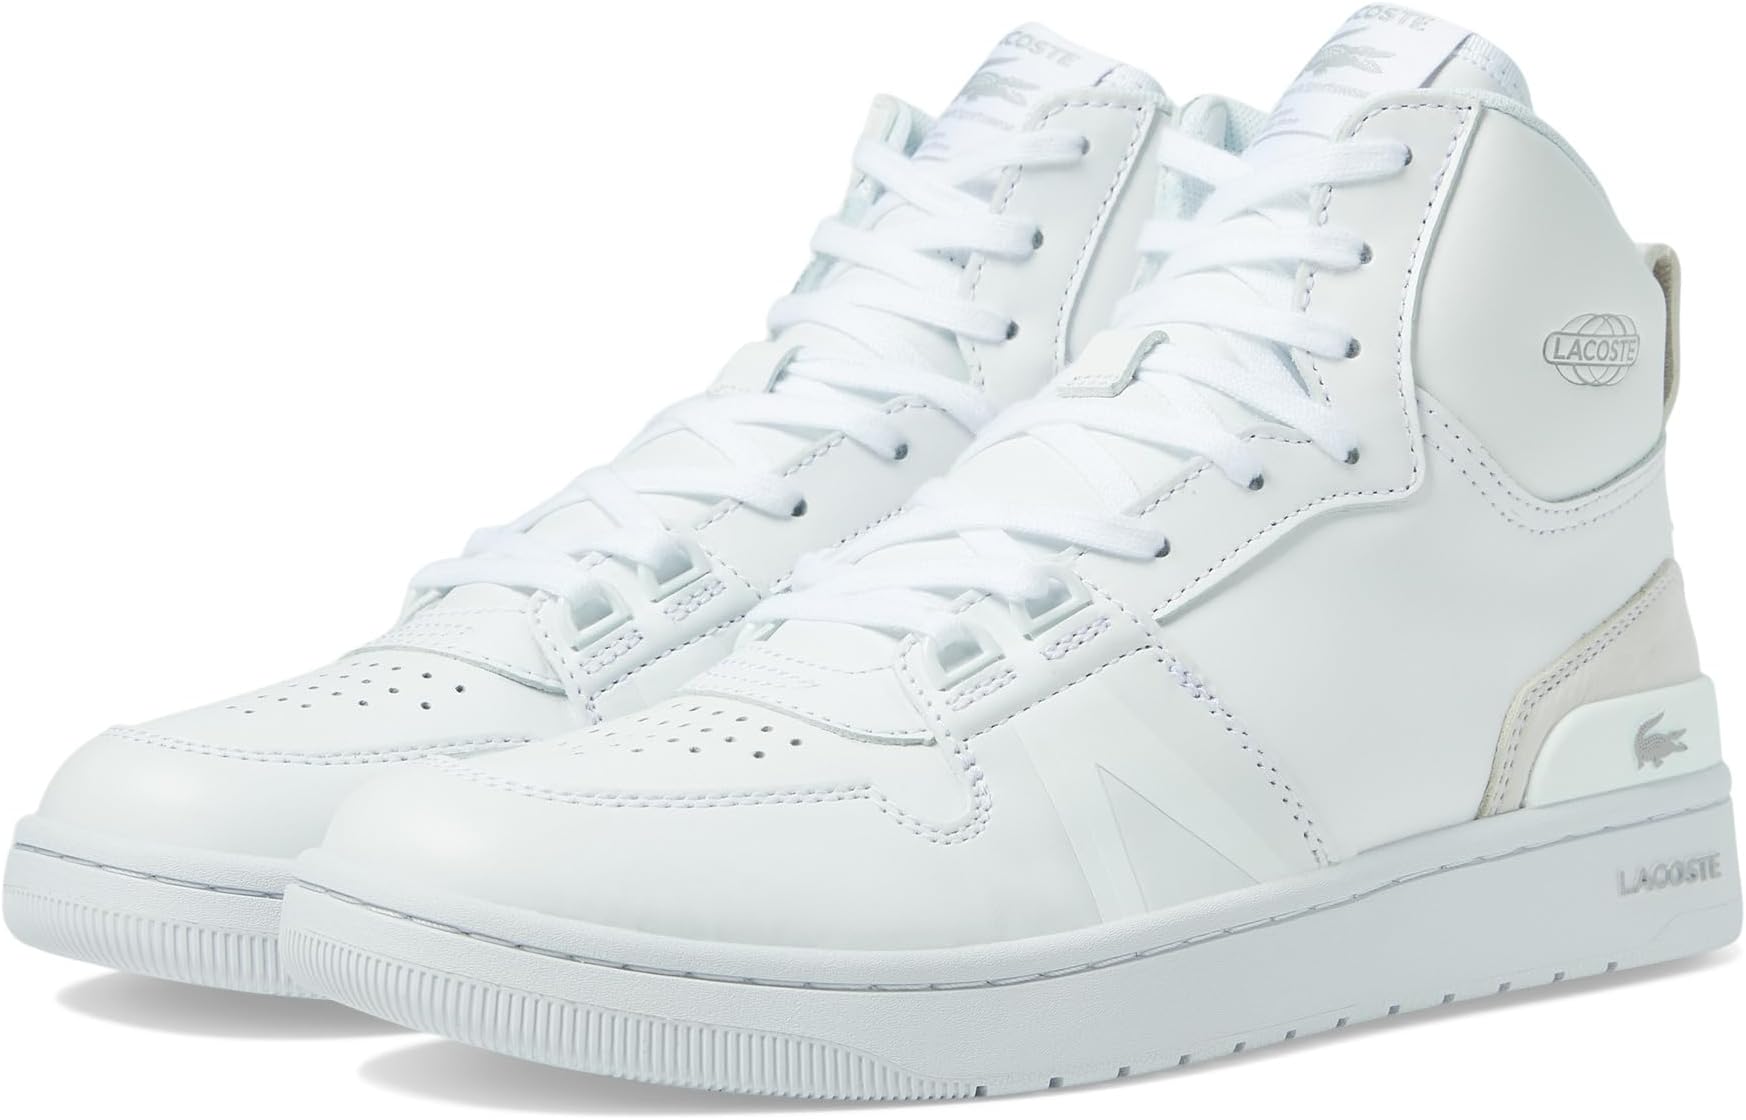 Кроссовки L001 Mid 223 4 SFA Lacoste, цвет White/White кроссовки lacoste l001 white offwhite